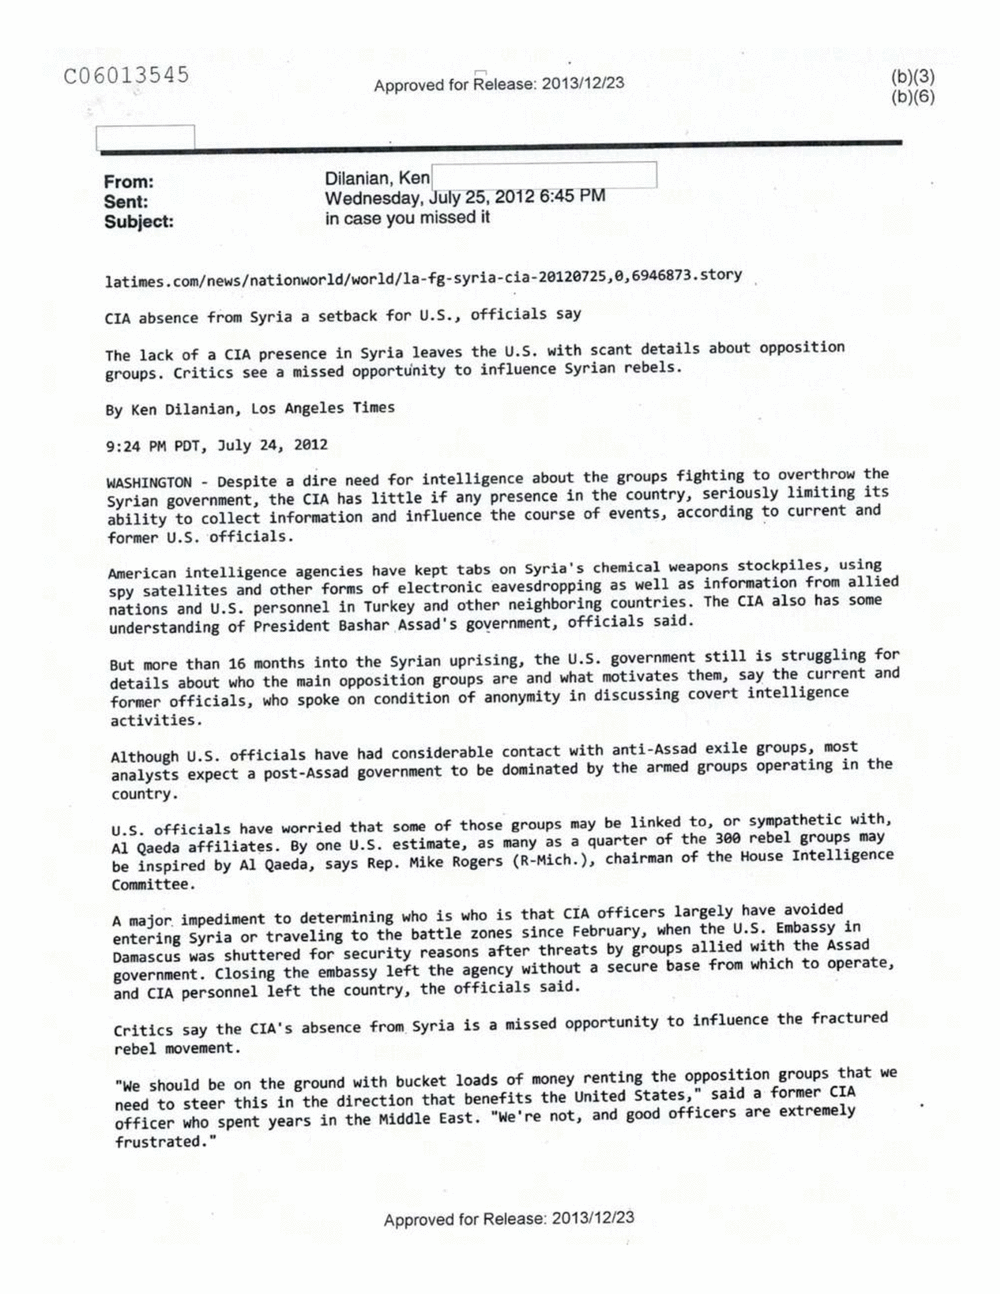 Page 405 from Email Correspondence Between Reporters and CIA Flacks